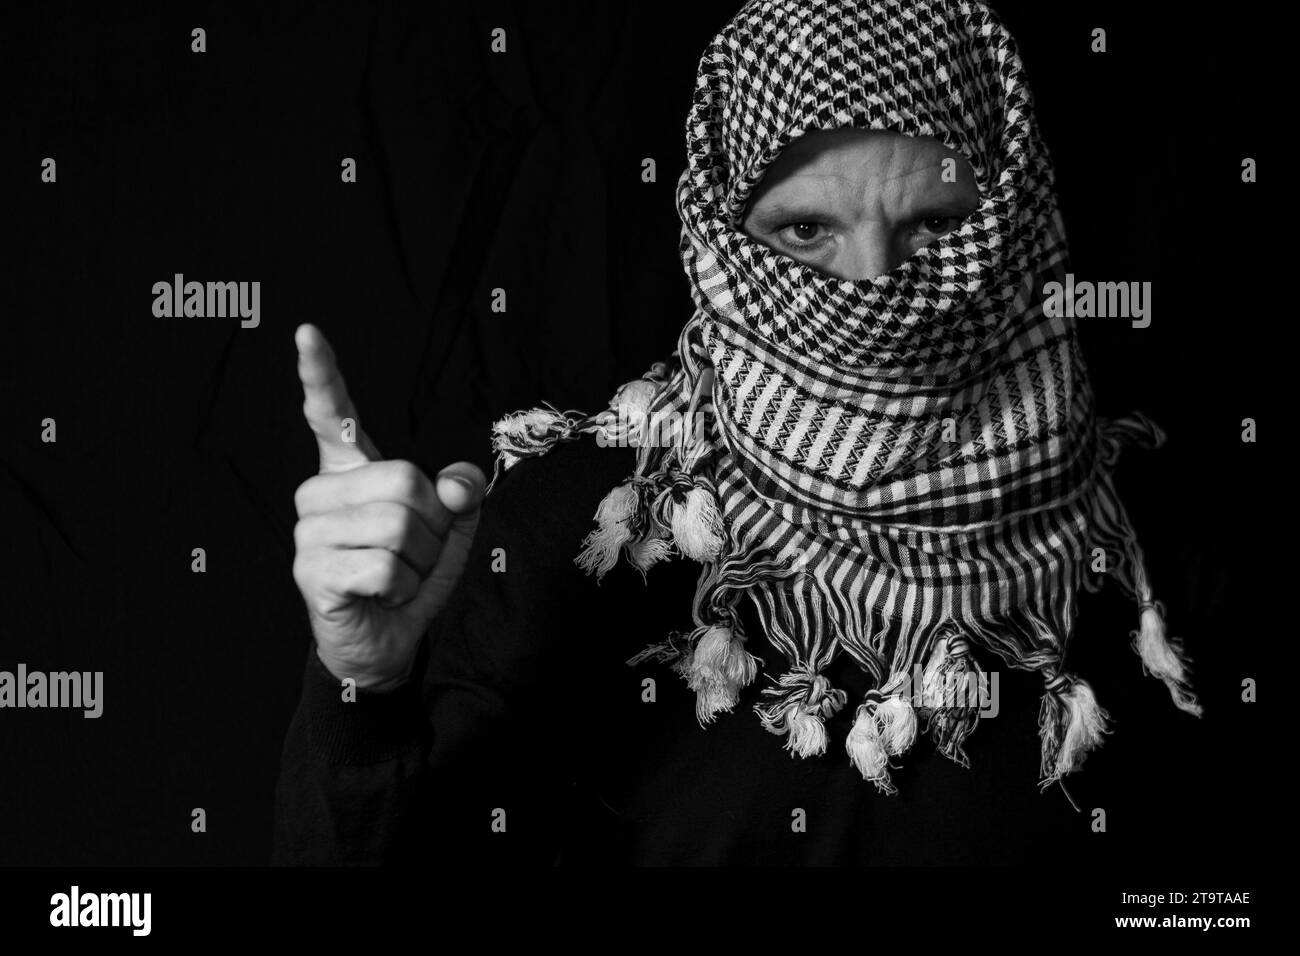 Portrait Adult man with Palestinian scarf put on his head on a black background Stock Photo